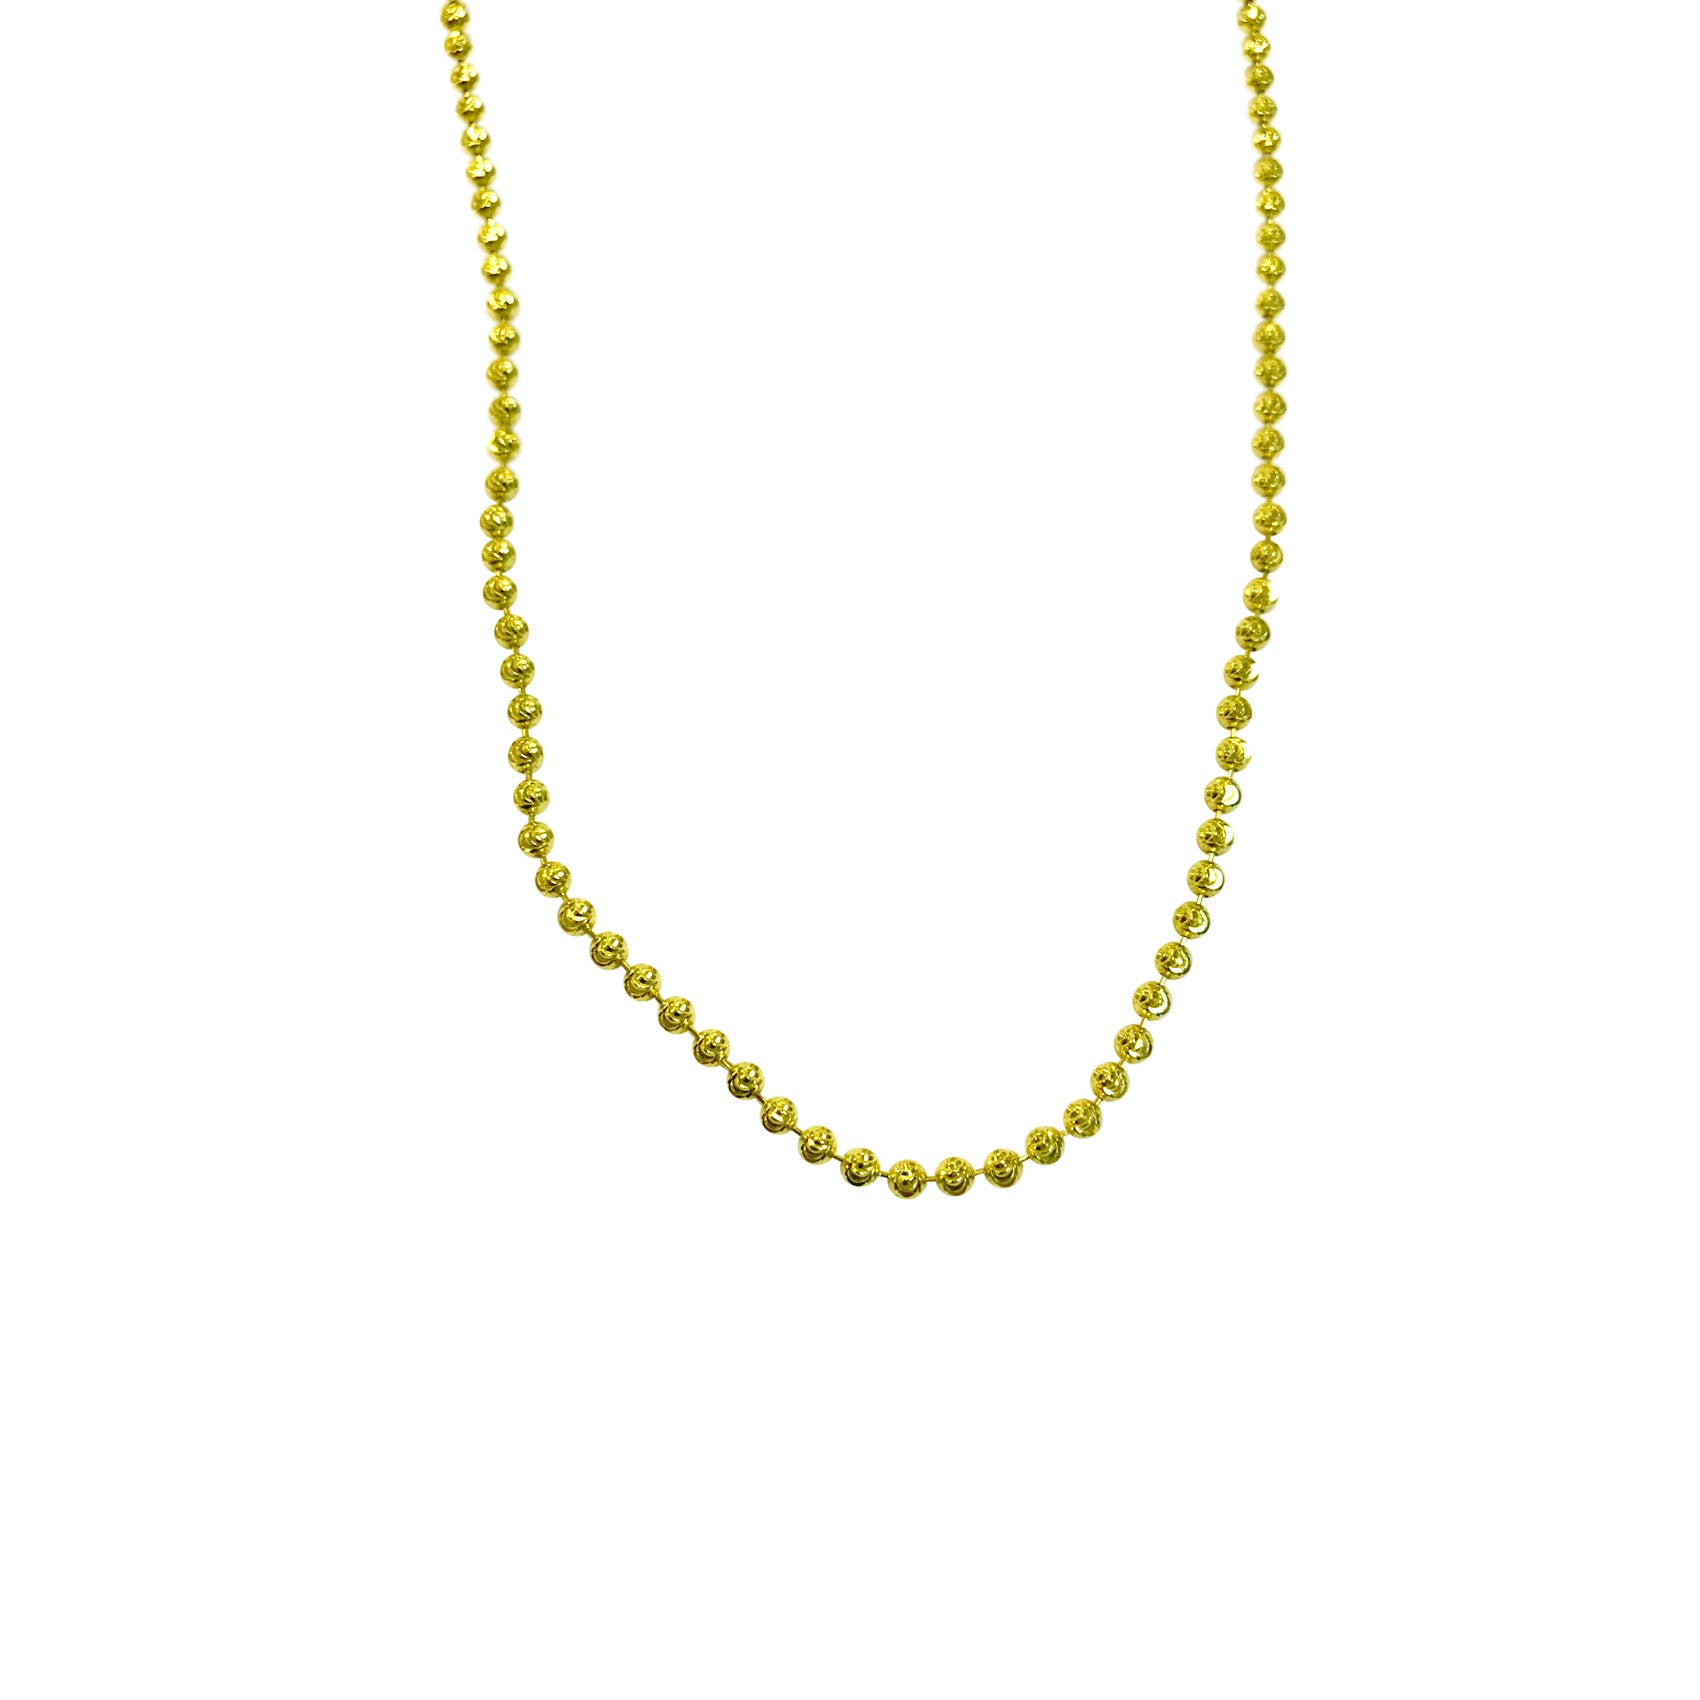 Gold-Dipped "Dazzle Dots" Beaded Chain Necklace